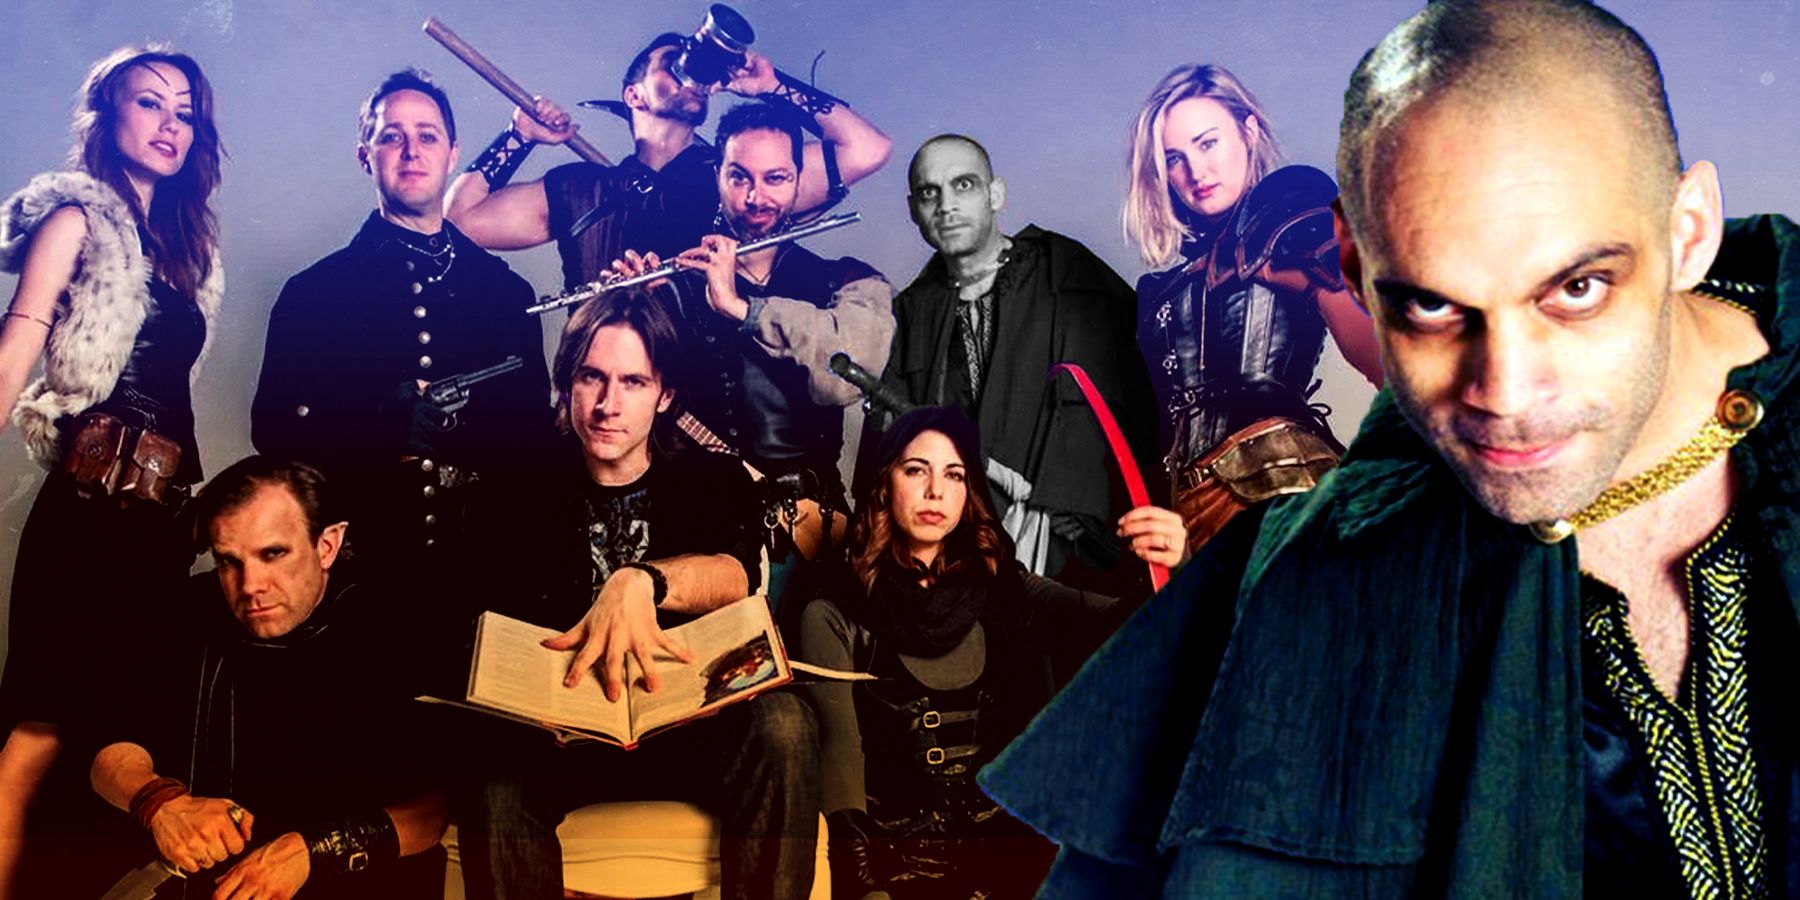 Critical Role's Vox Machina with Orion Acaba leaning in from the right.